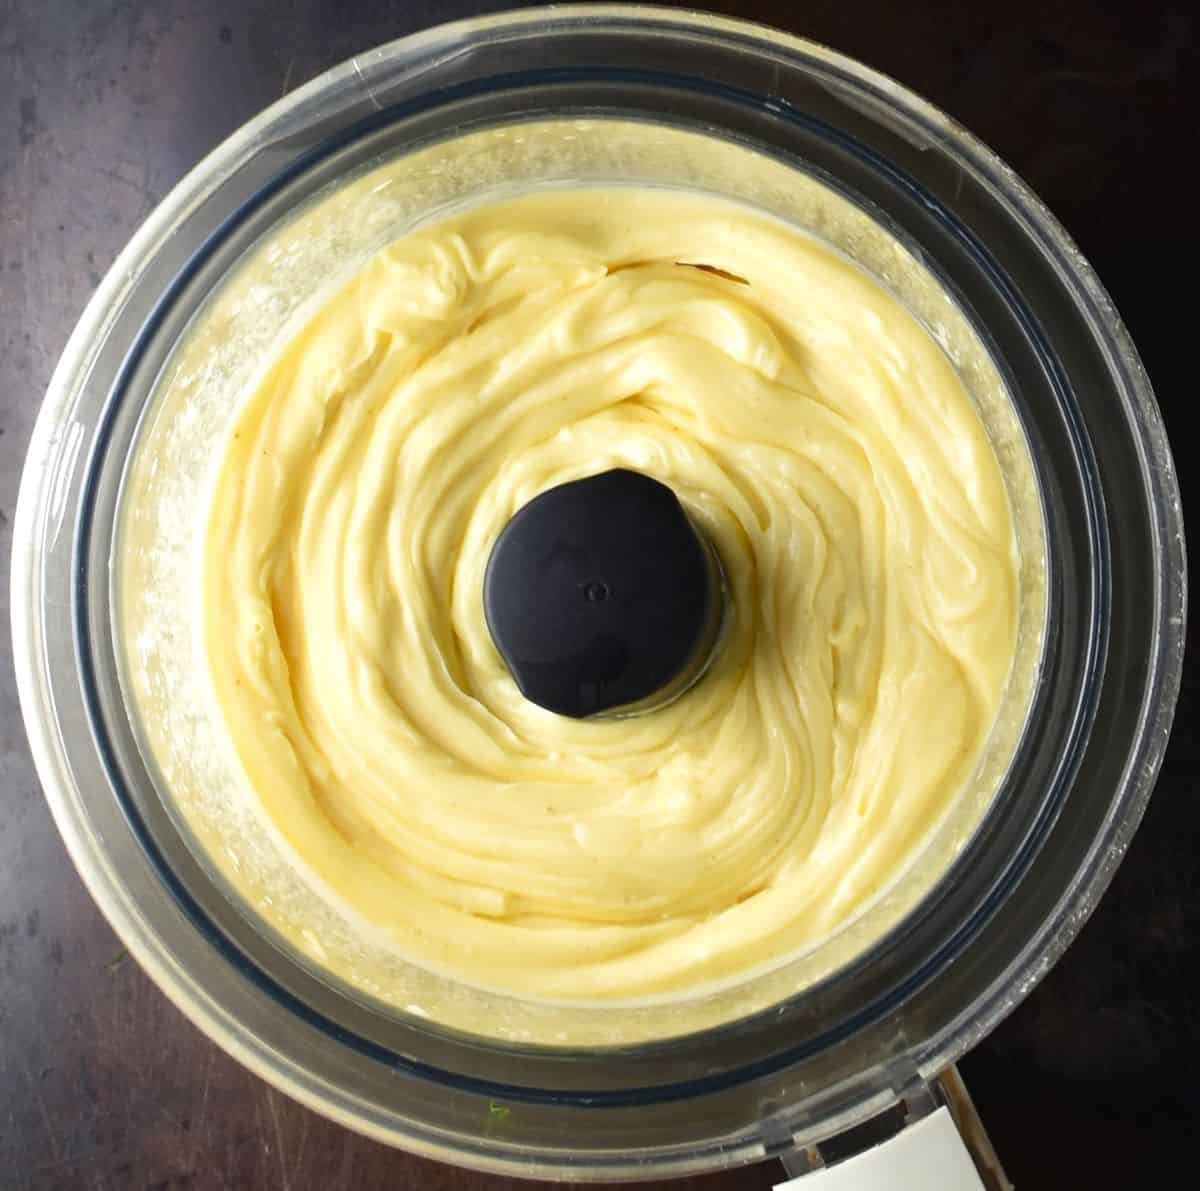 Top down view of homemade mayonnaise in food processor bowl.